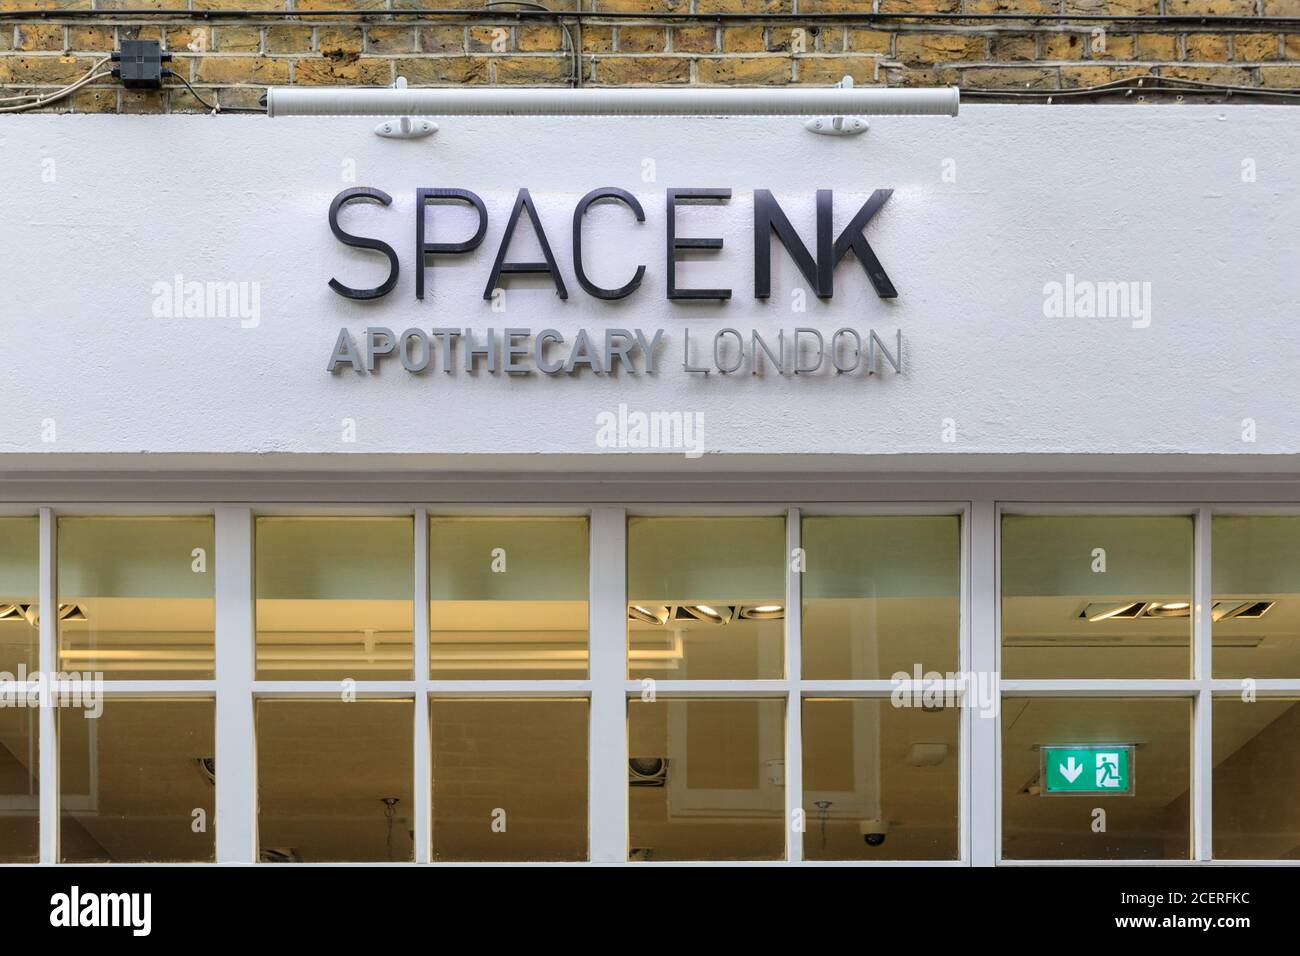 Space NK, British Cosmetics and Beauty products Retail chain shop exterior and logo, Covent Garden, Londres, Angleterre, Royaume-Uni Banque D'Images